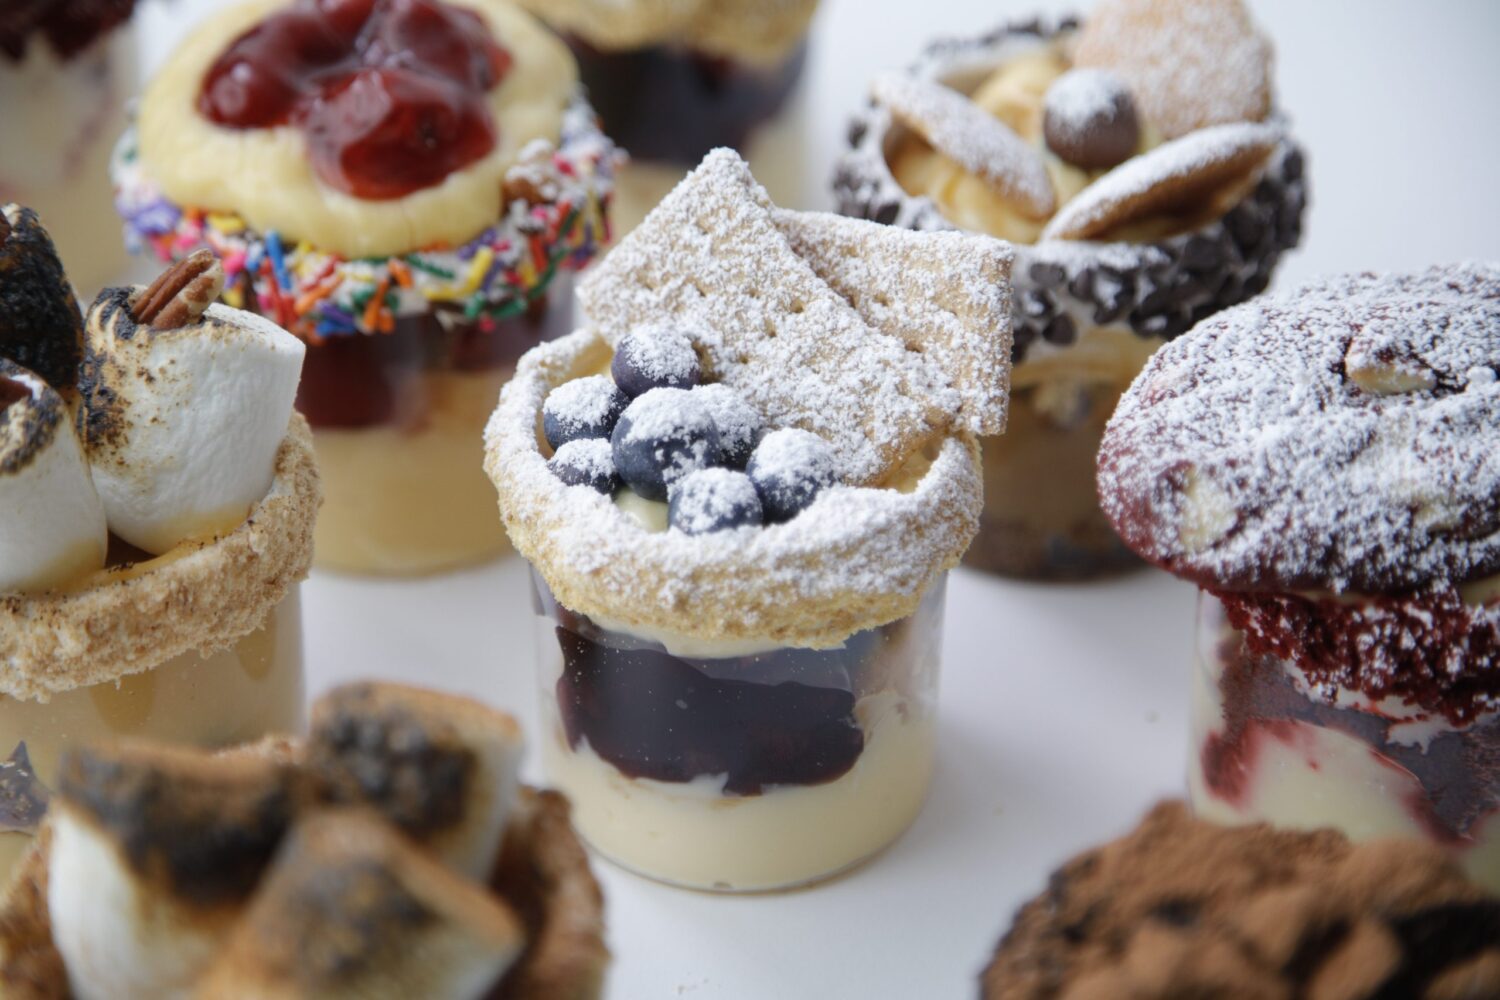 Jars of desserts topped with delicious dessert toppings